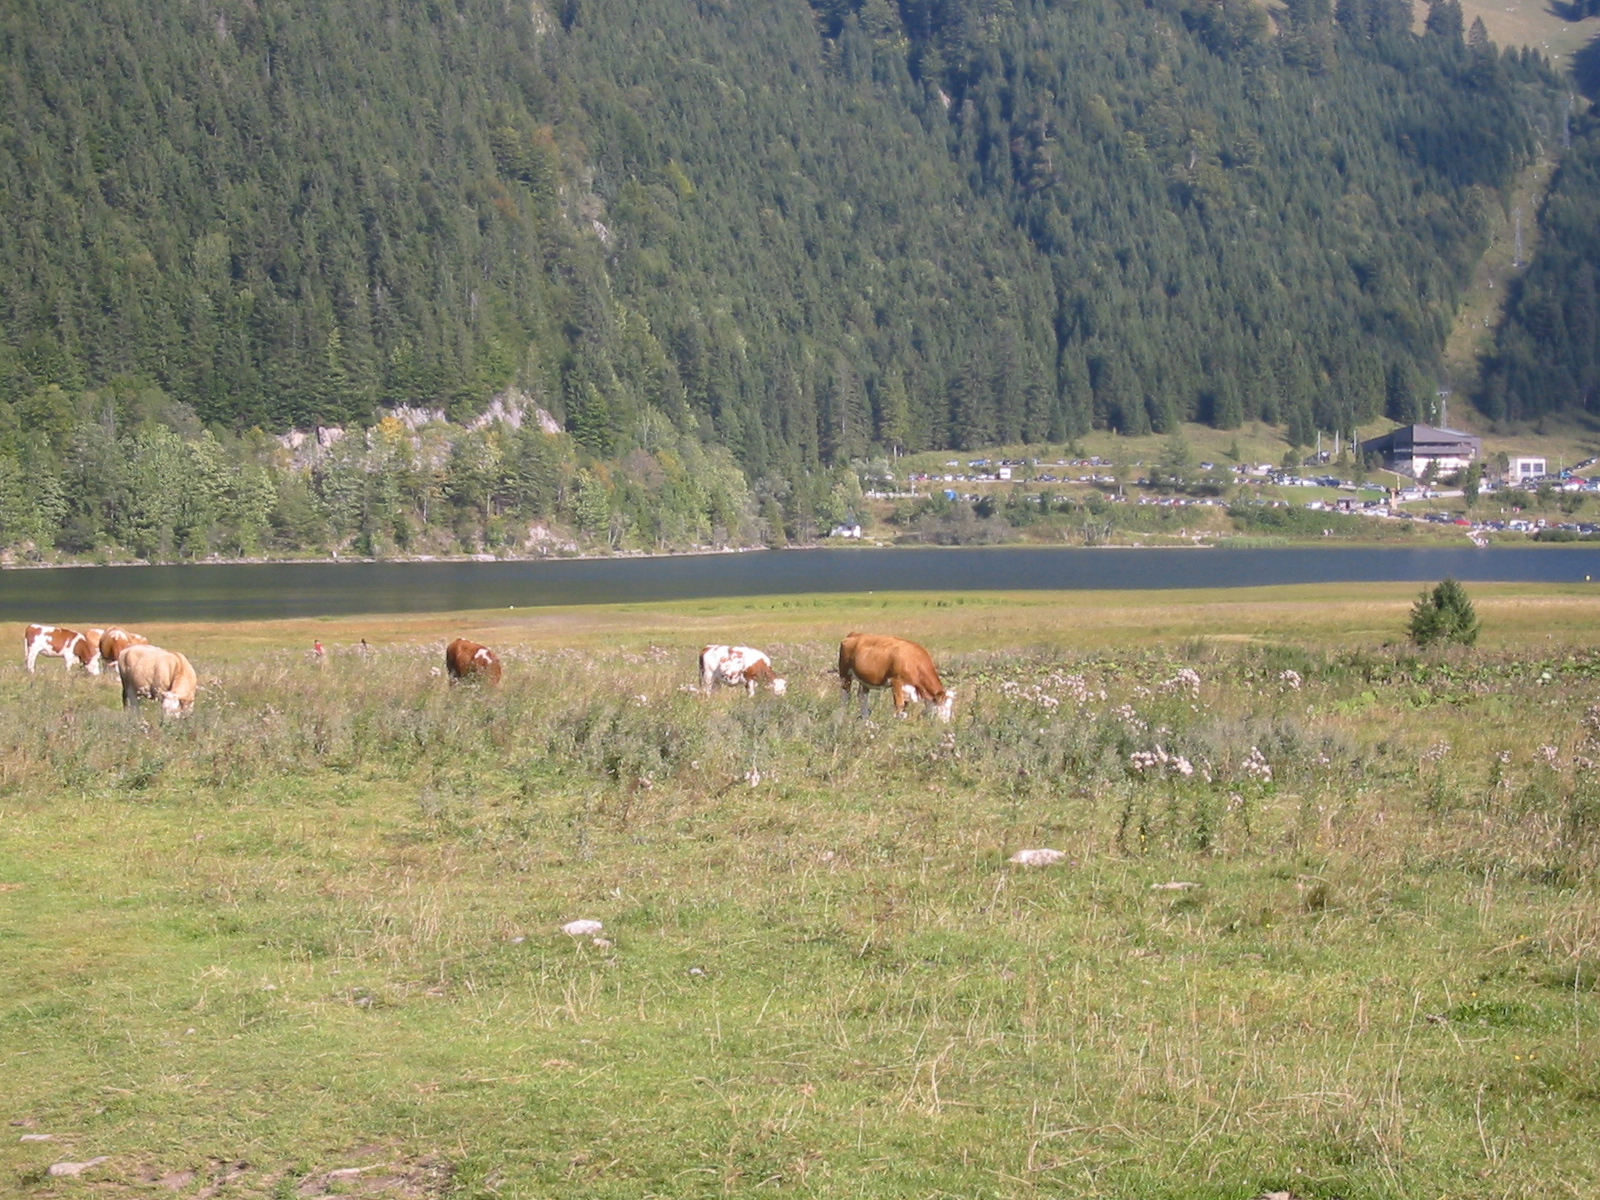 several horses grazing on grass near water in a mountain pasture